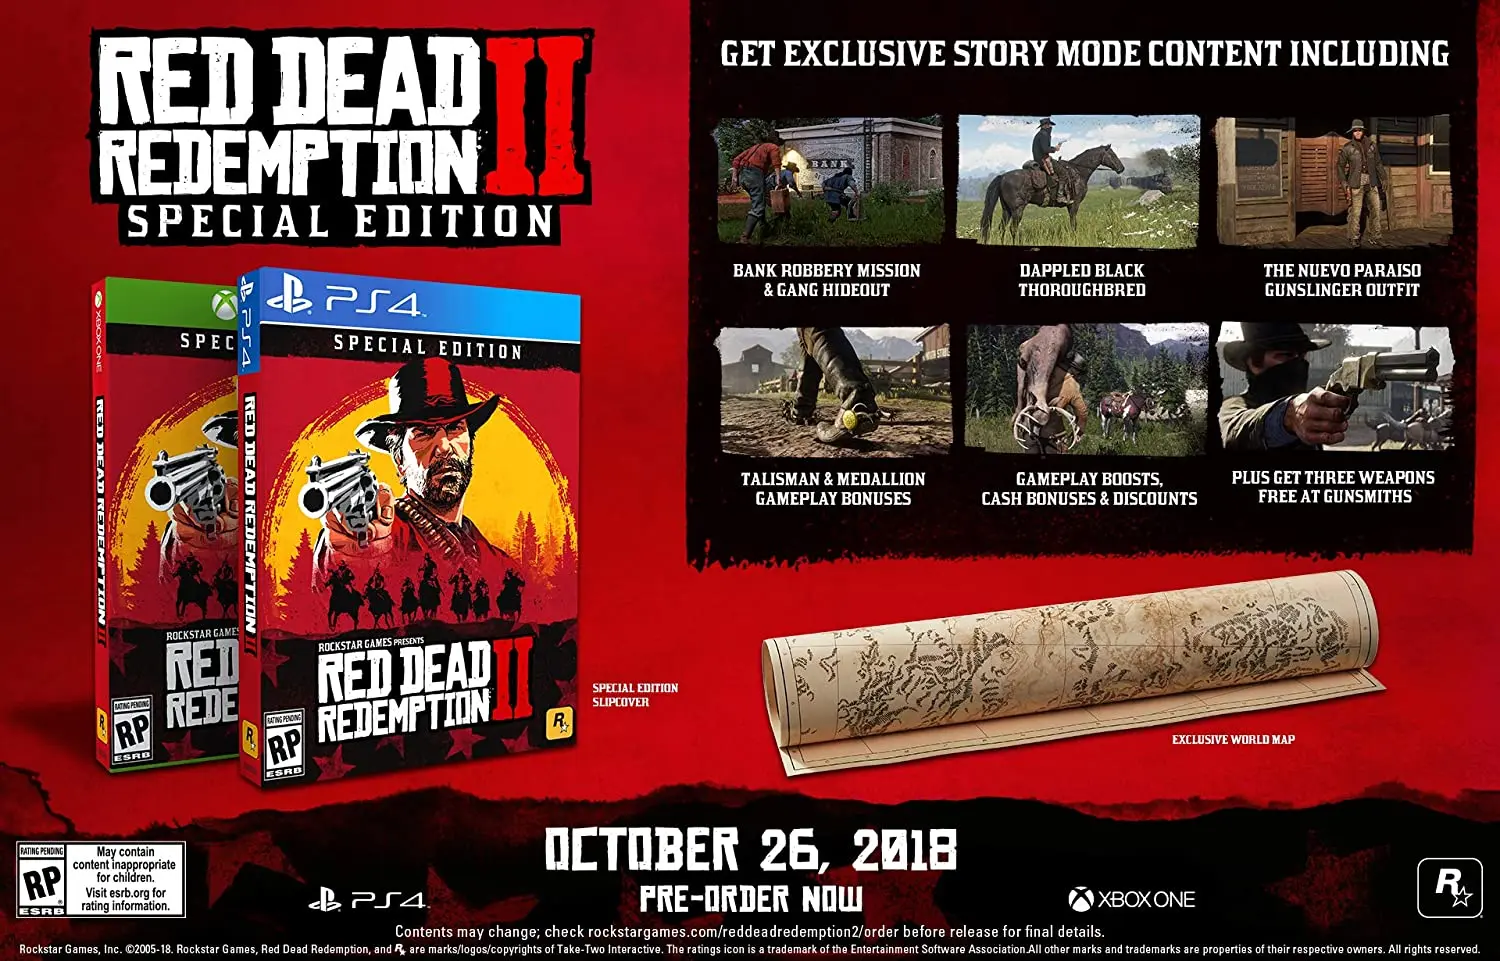 Red Dead Redemption 2 - Playstation 4 (PS4) [video game] : Video Games 